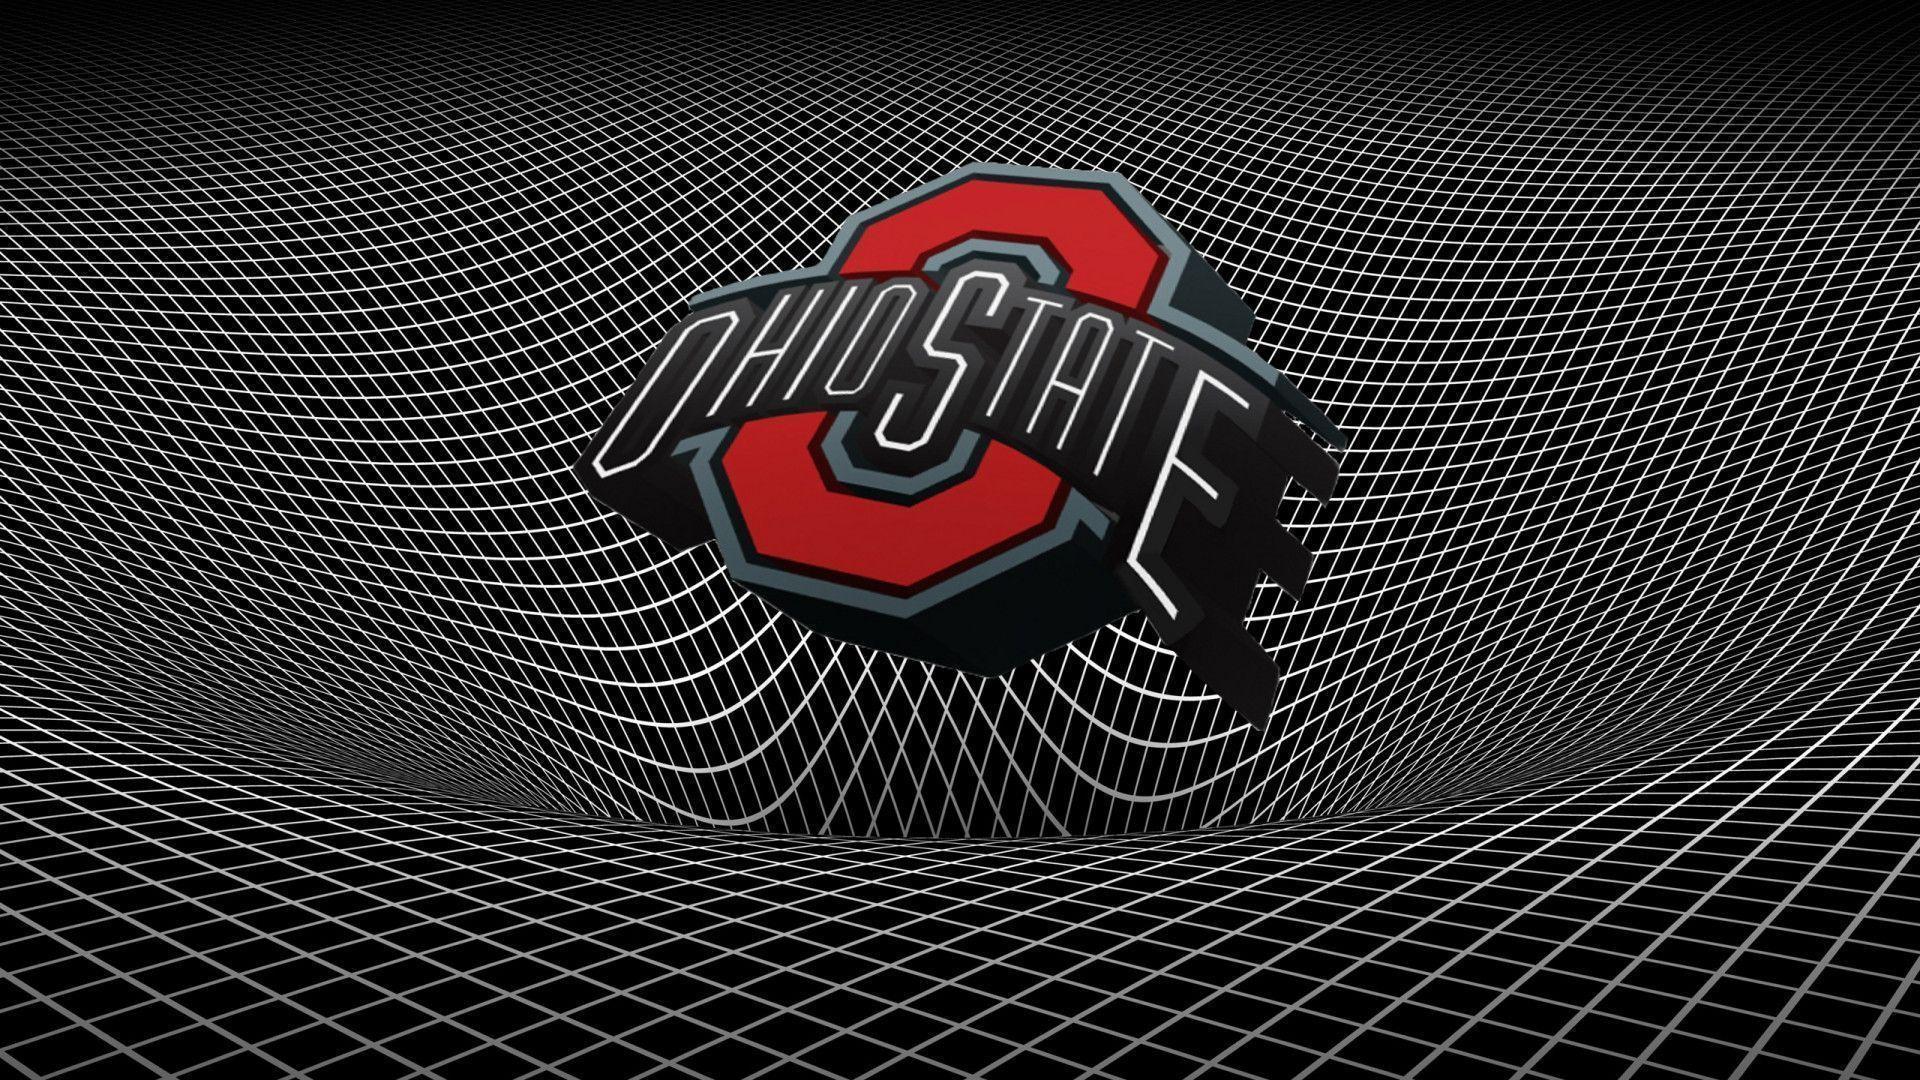 HD ohio state football wallpapers / Wallpapers Database